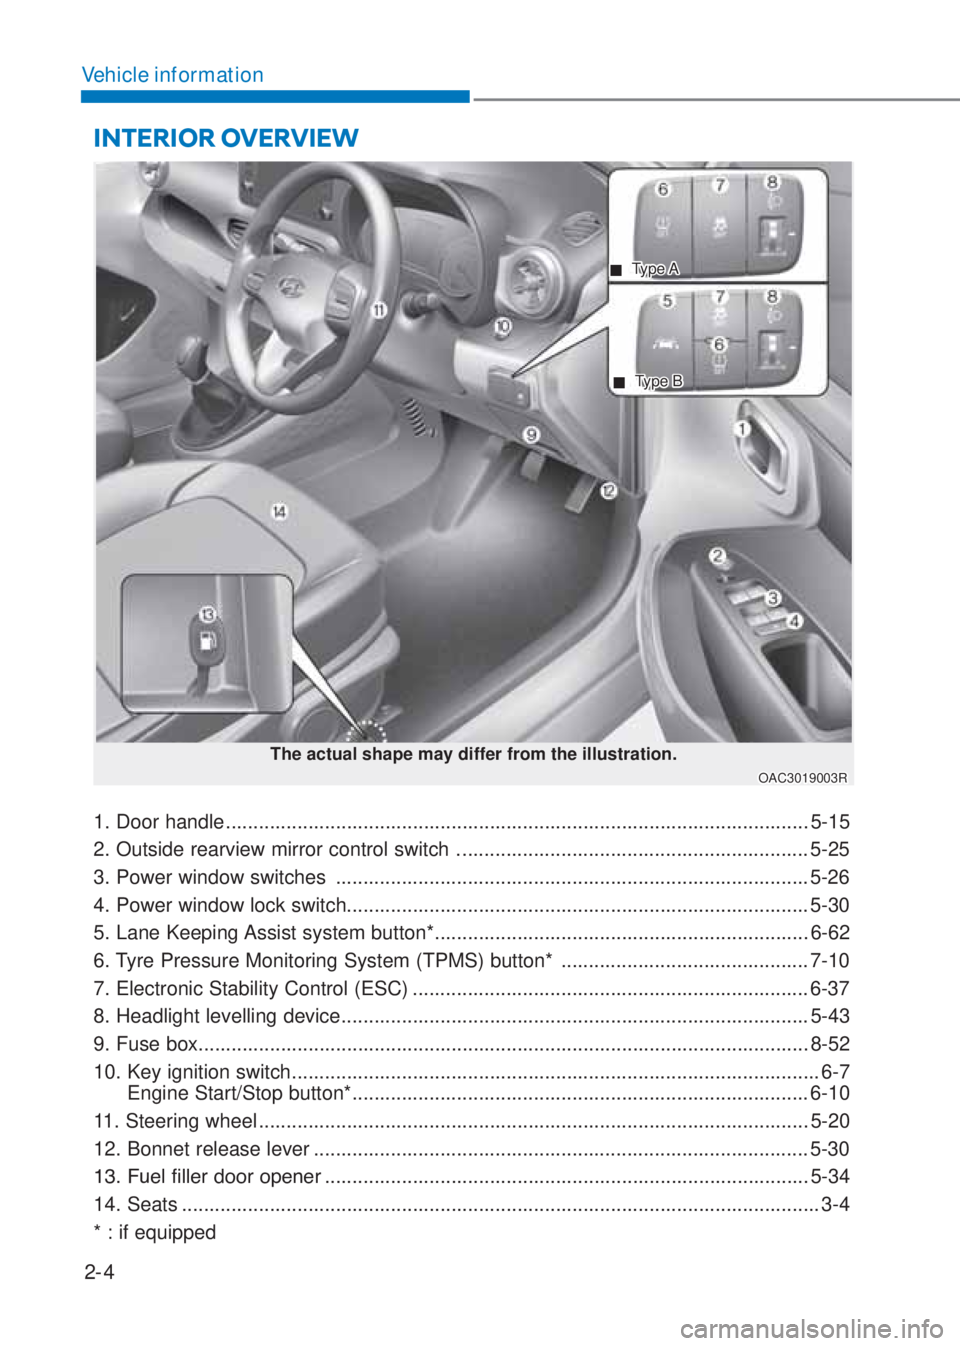 HYUNDAI I10 2021  Owners Manual 2-4
Vehicle information
INTERIOR OVERVIEW 
The actual shape may differ from the illustration.
OAC3019003R
1. Door handle ...............................................................................